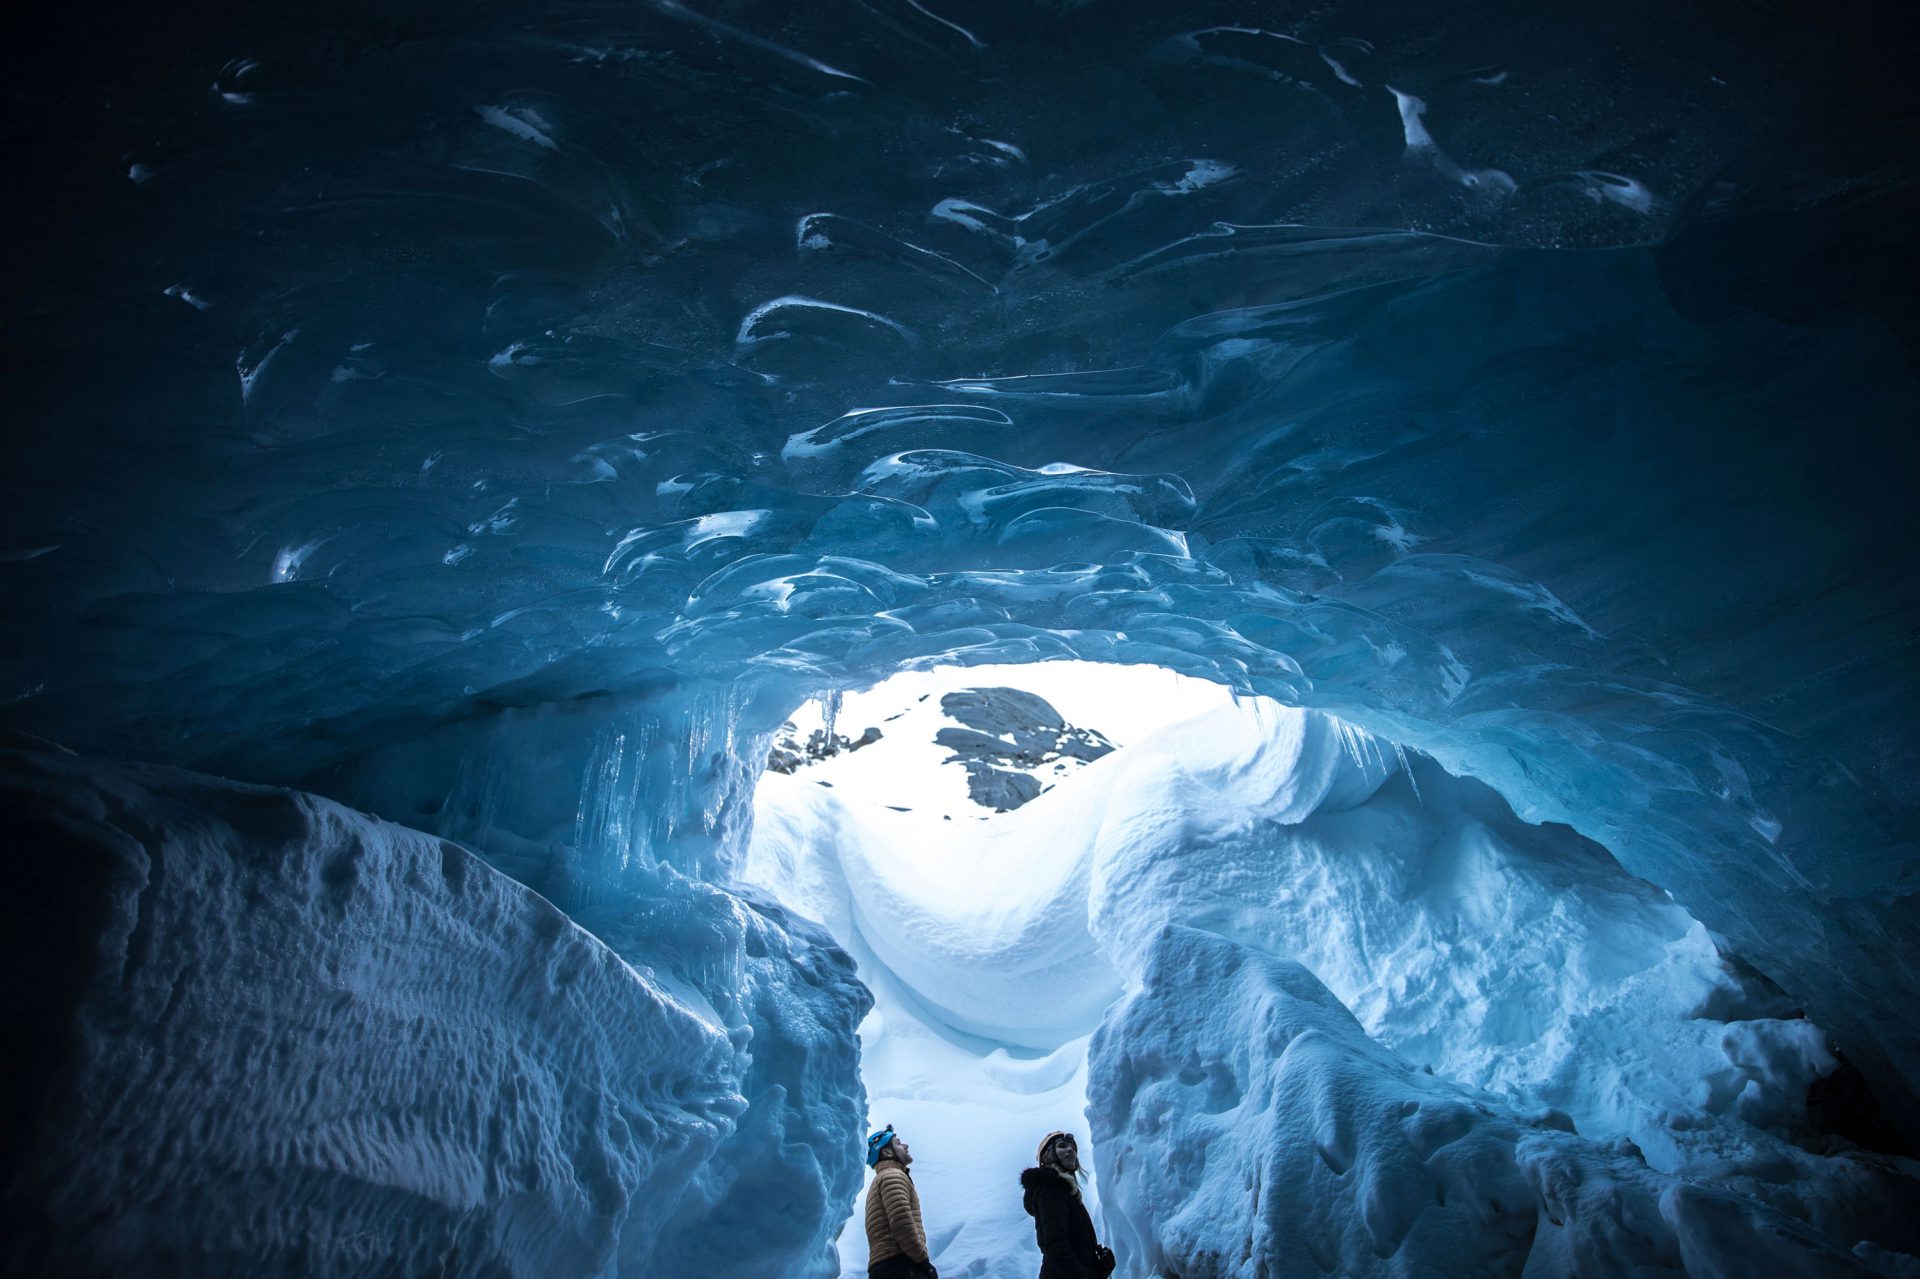 Beautiful ice cave experience in BC